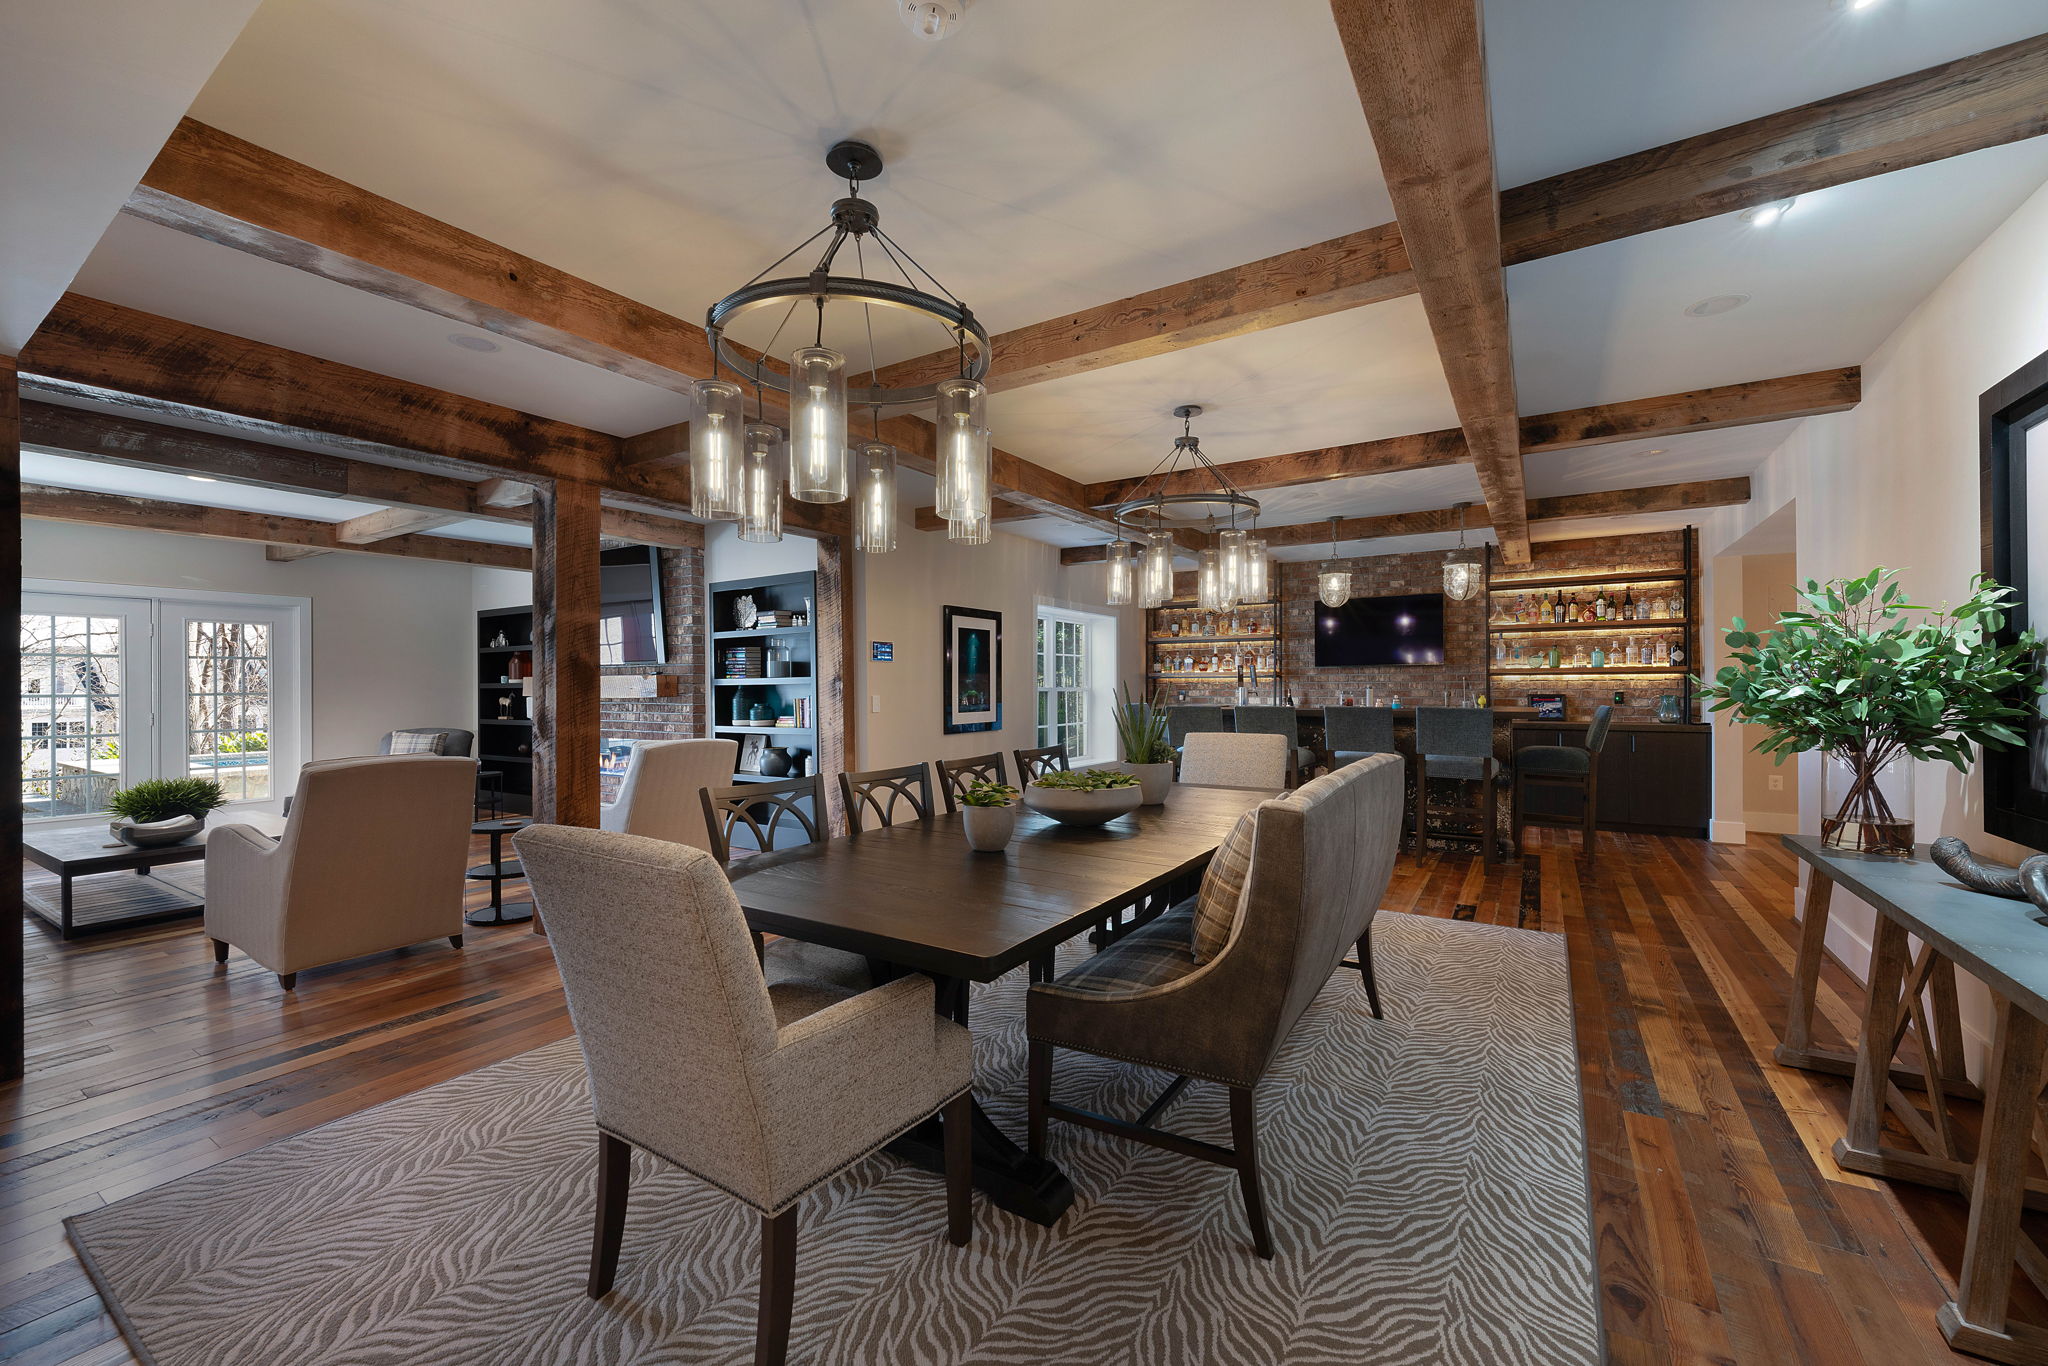 Totally stunning remodeled lower level with reclaimed oak beams accenting the ceiling